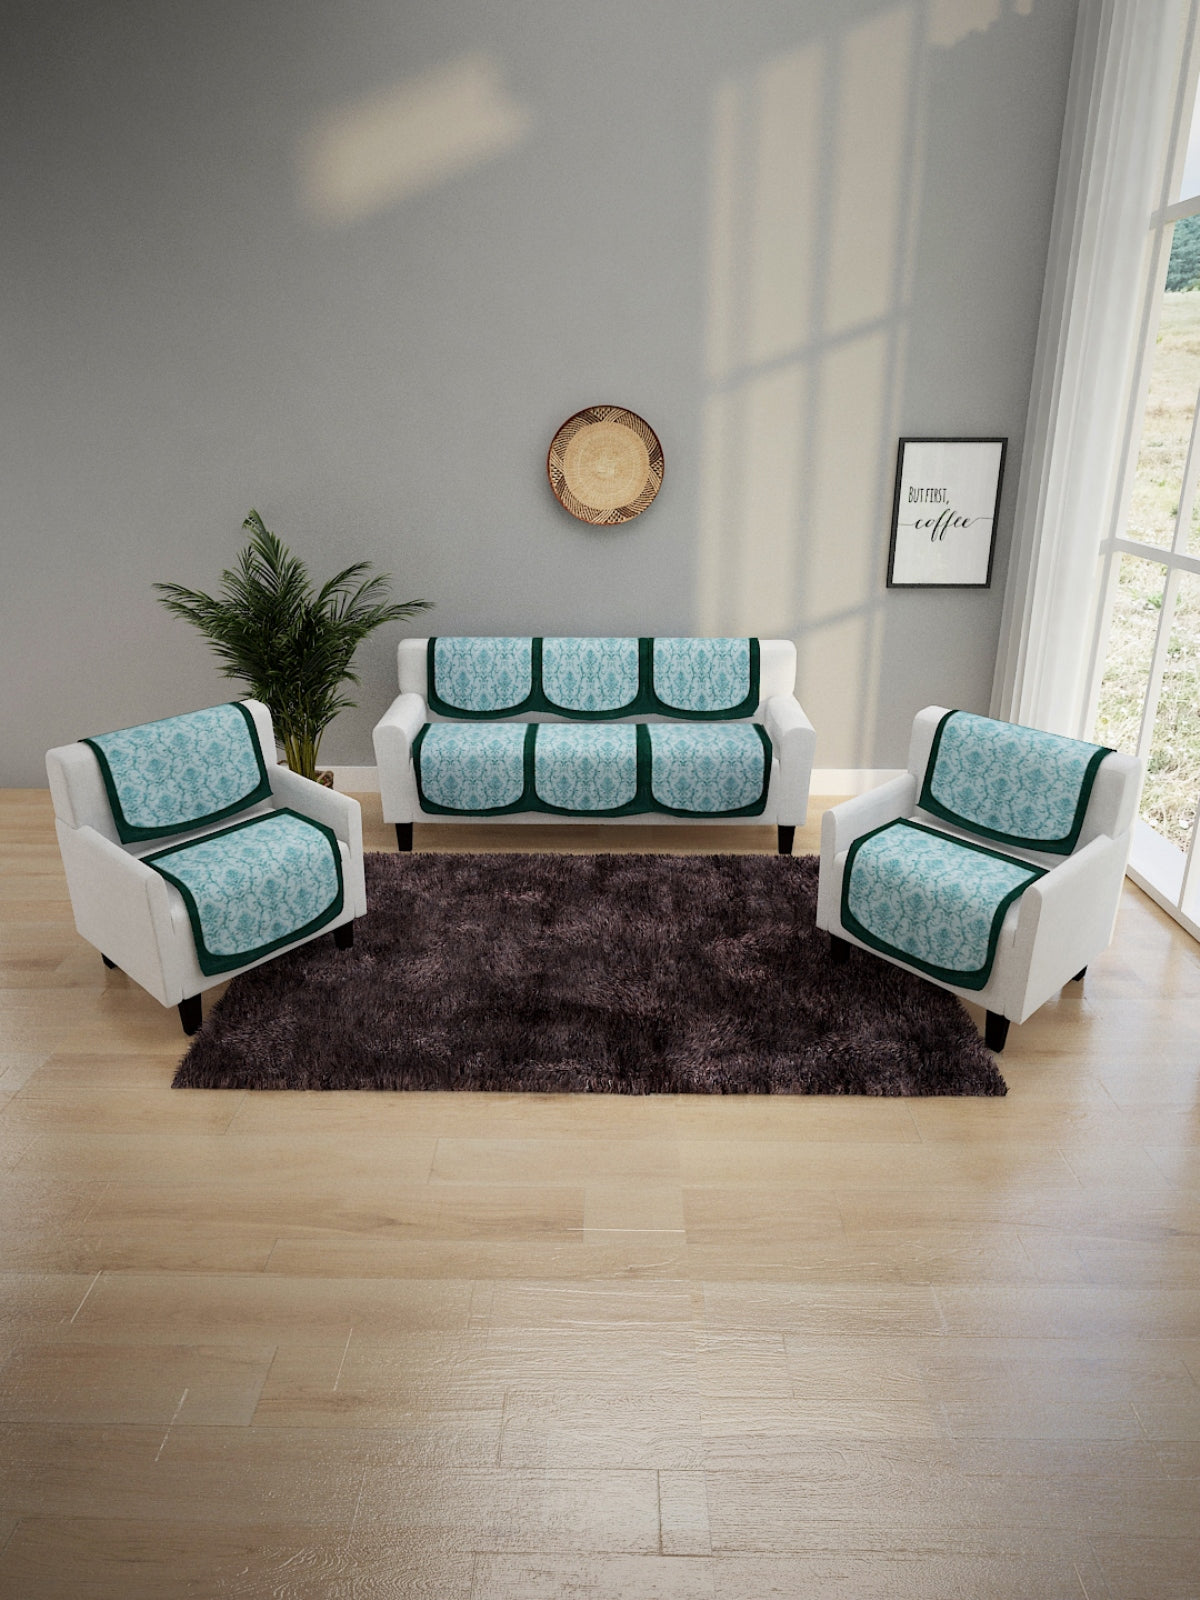 6-Pieces Turquoise Blue Woven Design 5-Seater Sofa Covers